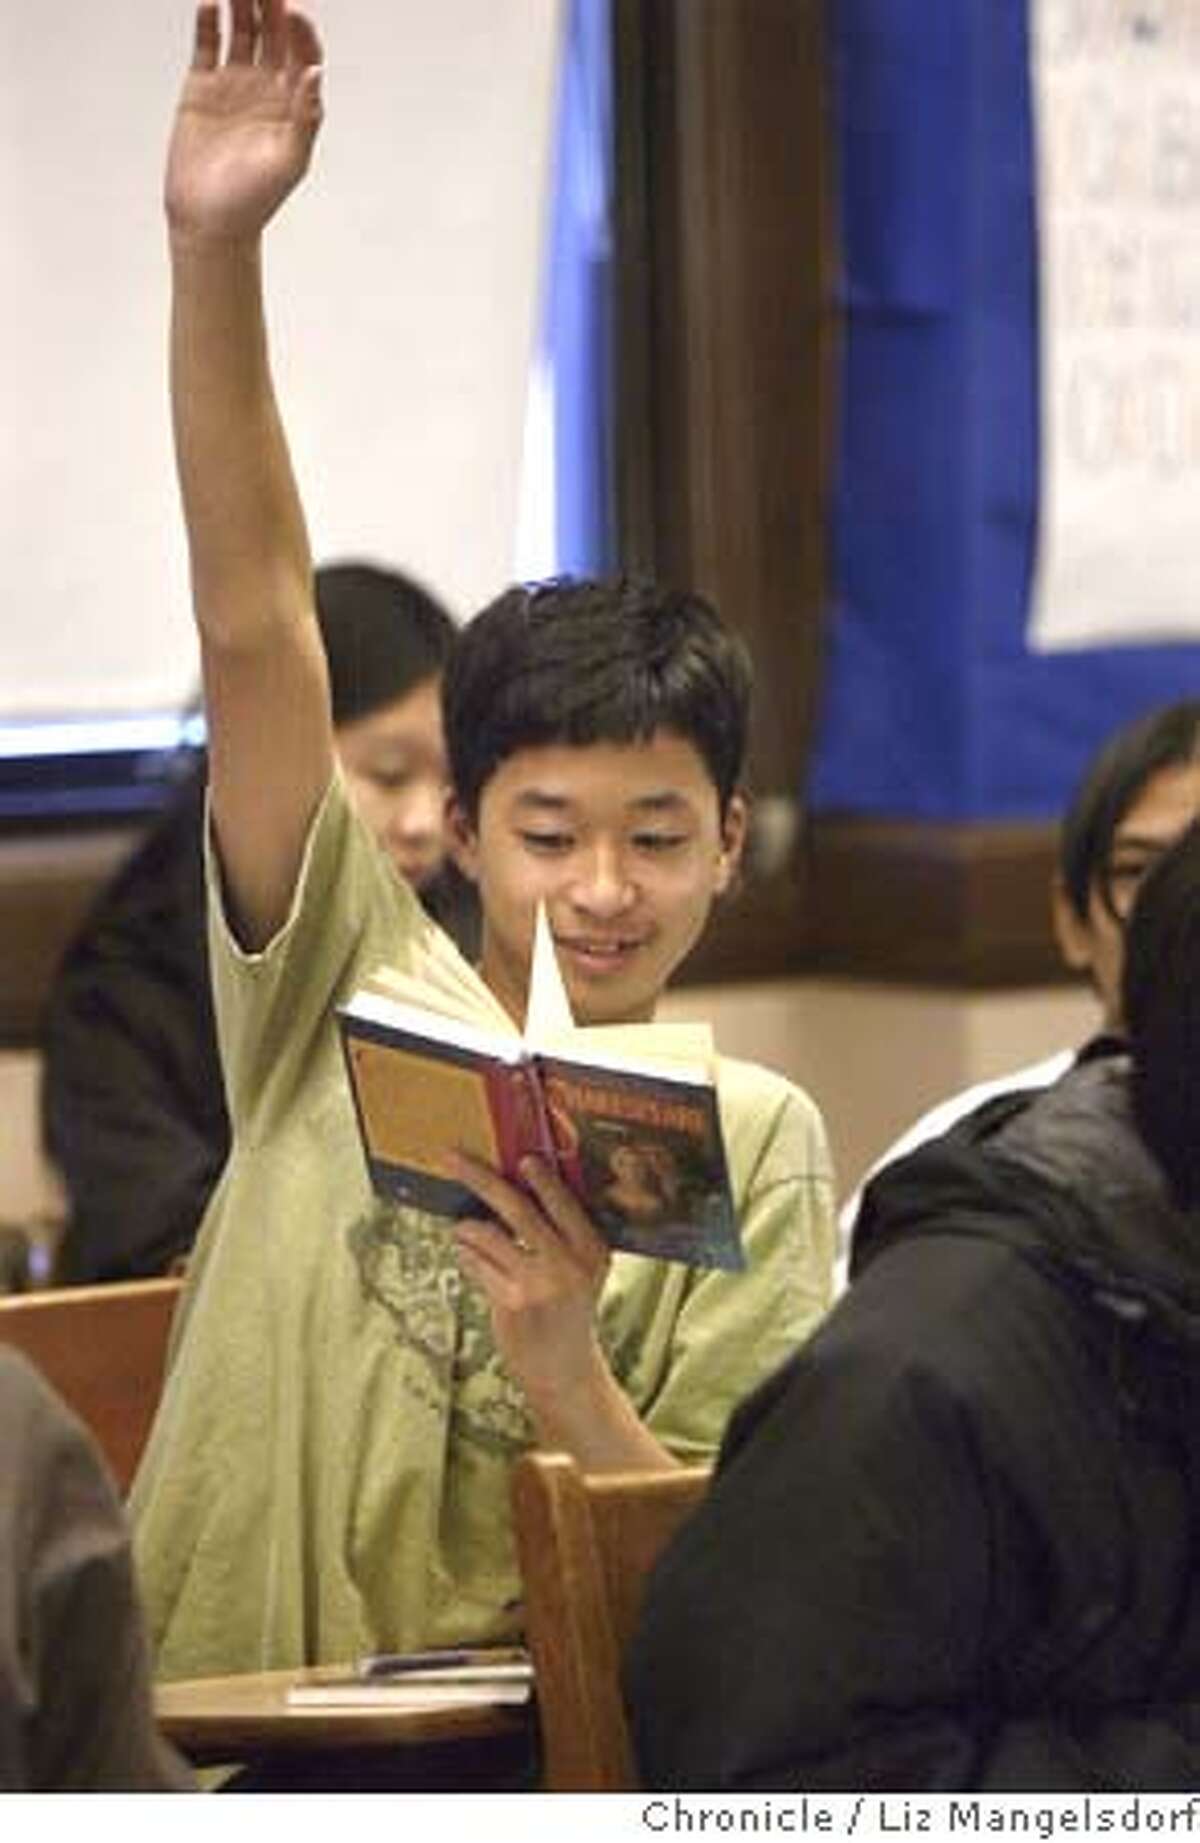 balboa27_304_lm.JPG Event on 1/26/05 in San Francisco. Balboa 9th grader Kamal Nguyen raises his hand to discuss Shakespear's Romeo and Juliet during 9th grade World Lit Honors class. Story on Balboa High School, and their work to get more students into Advanced Placement courses. They start in 9th and 10th grade with honor courses to prepare students for AP. Liz Mangelsdorf / The Chronicle MANDATORY CREDIT FOR PHOTOG AND SF CHRONICLE/ -MAGS OUT